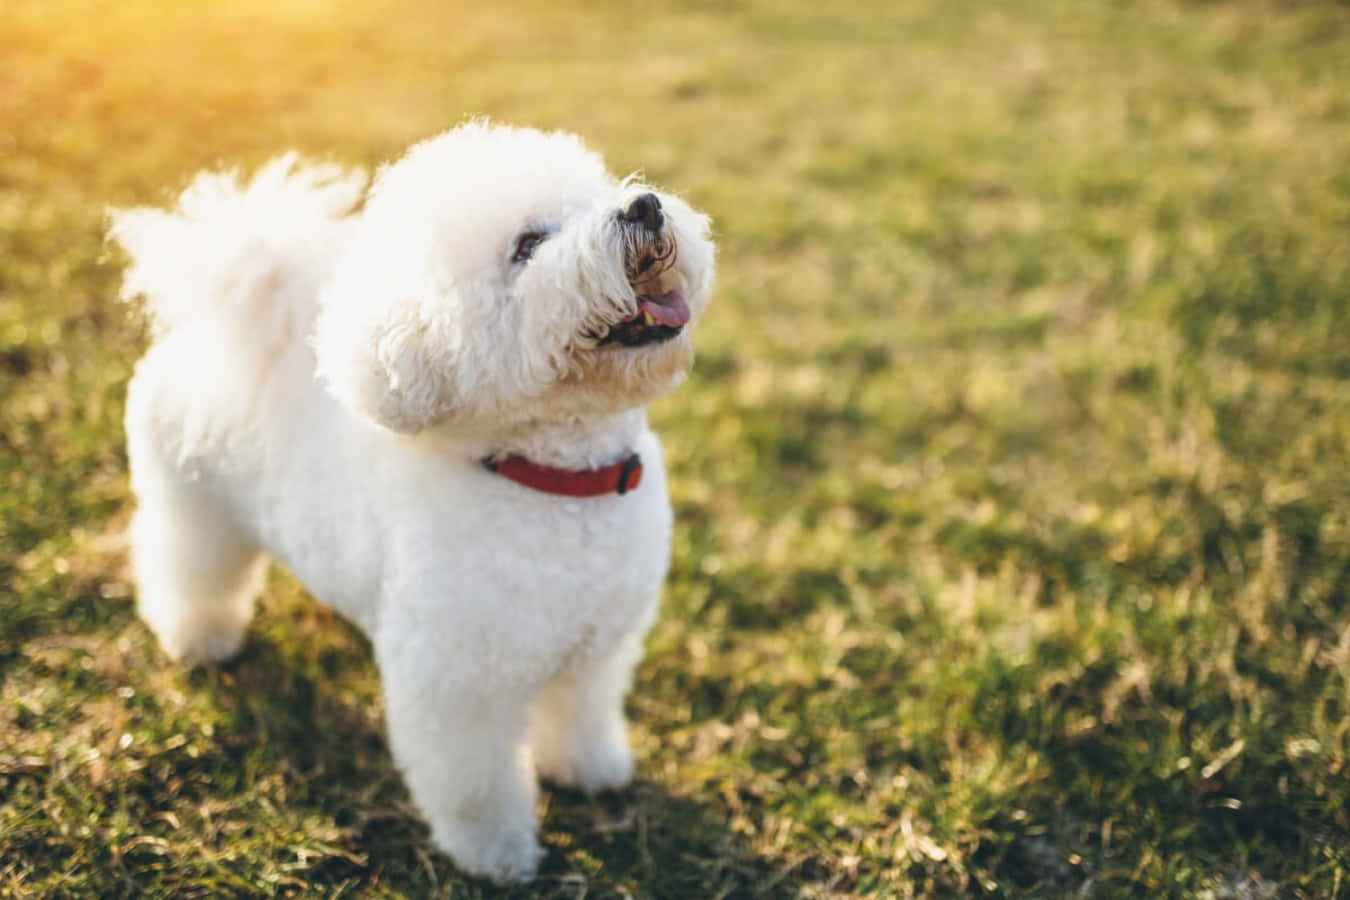 A white and fluffy Bichon Frise looking up from the grass.